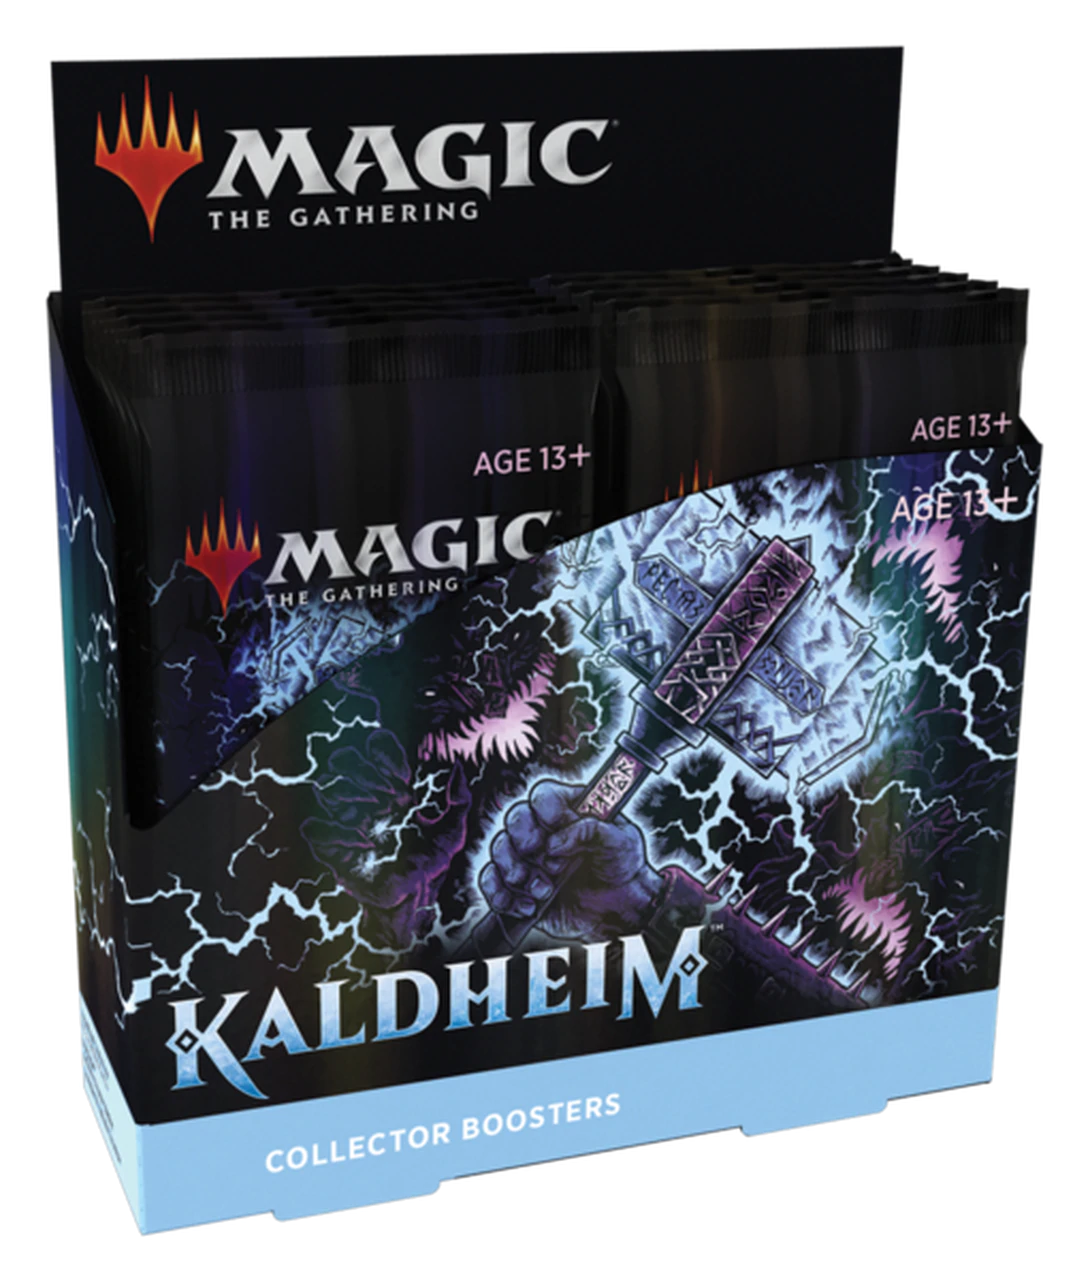 Magic the Gathering Kaldheim Collector's Booster Box Pre-Sale